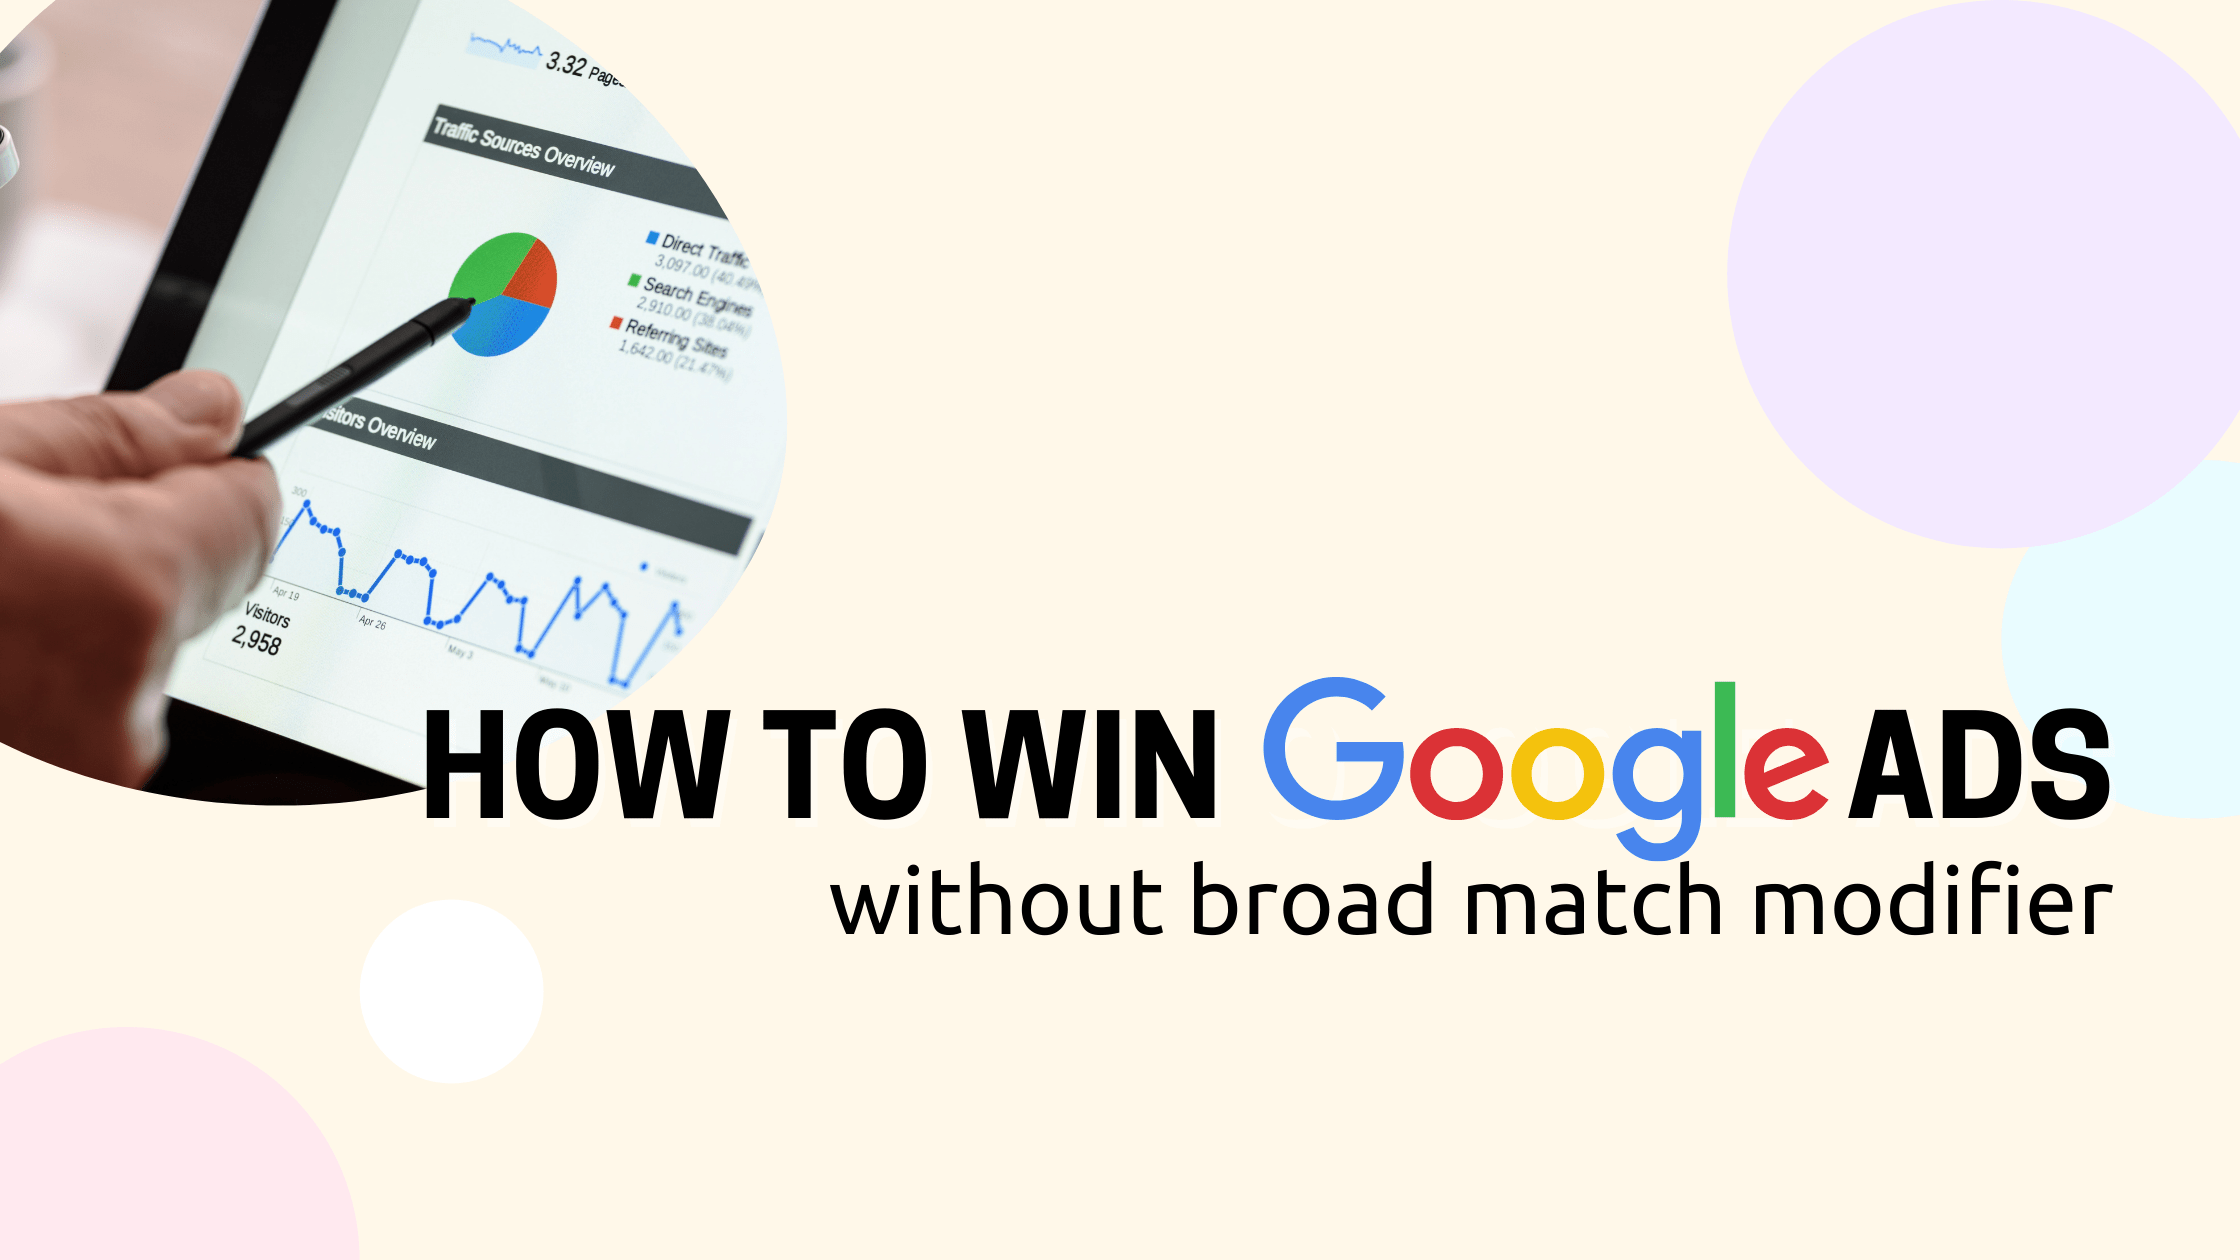 HOW can you win in google ads without broad match modifier? What are the strategies with the recent changes to phrase match and broad match modifier?